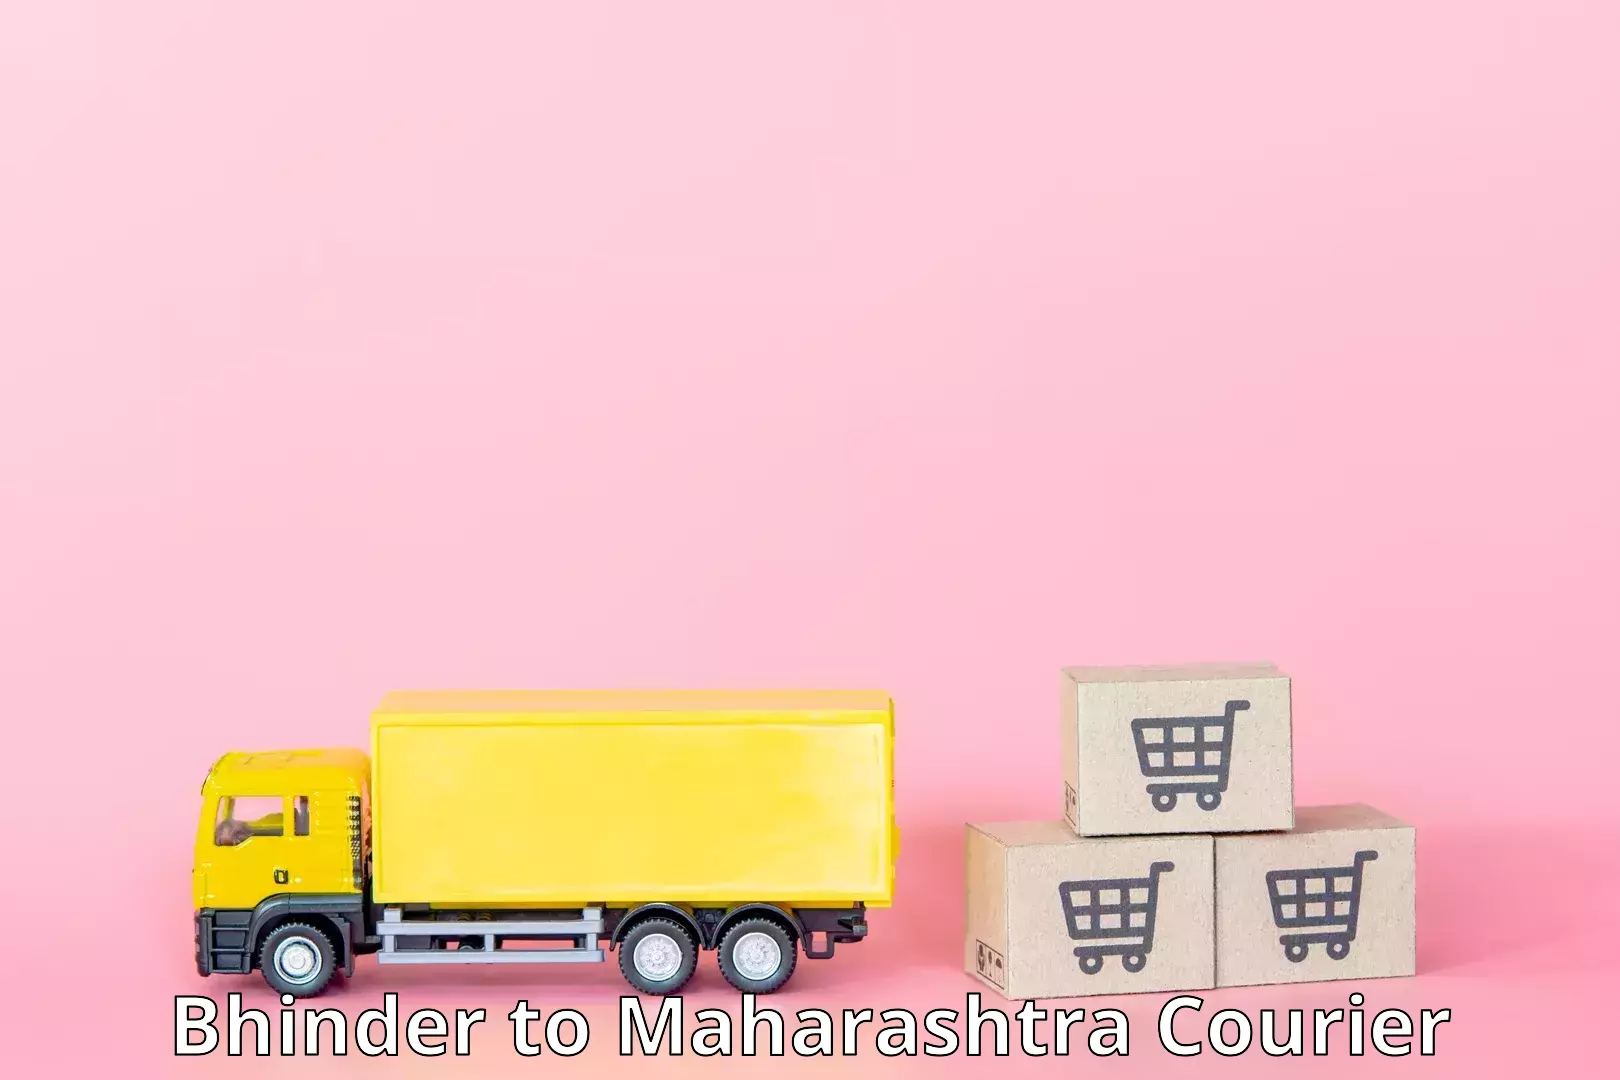 Courier service efficiency Bhinder to Beed